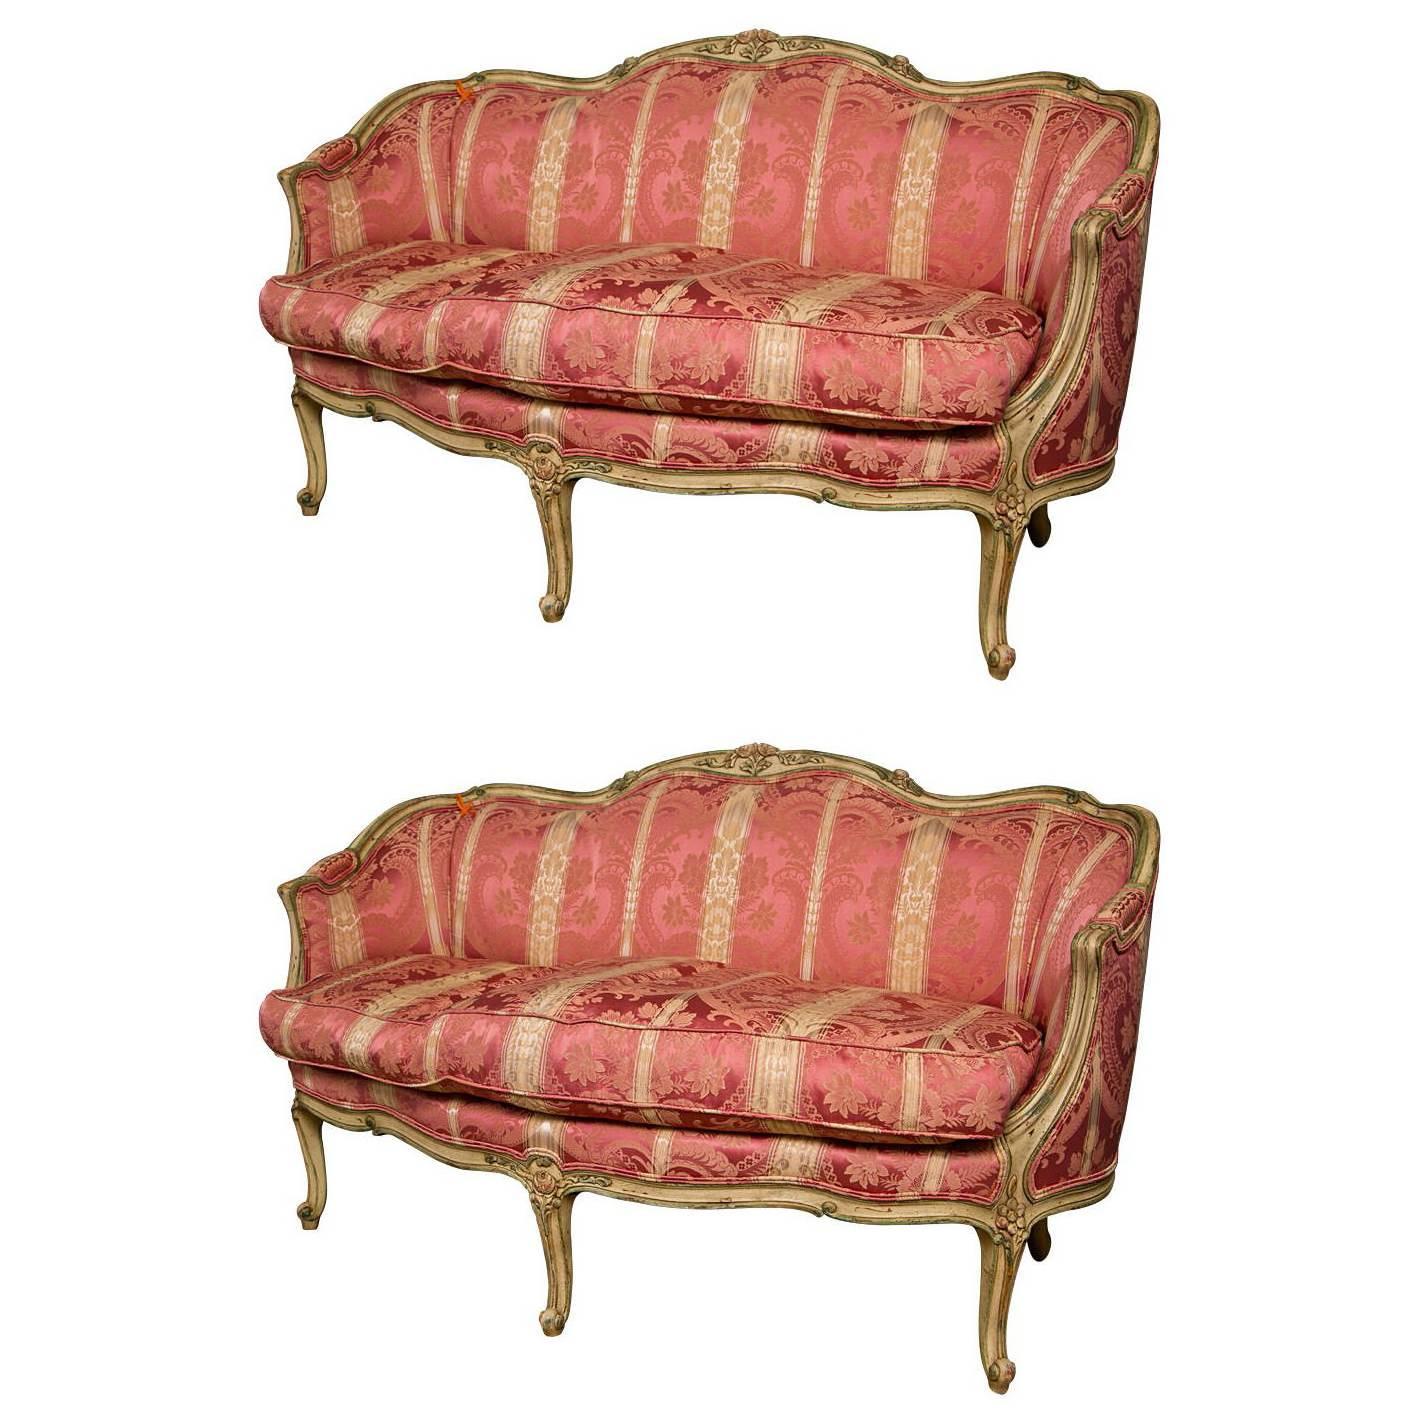  French Finely Carved Louis XV Settees, Canapes by Widdicomb